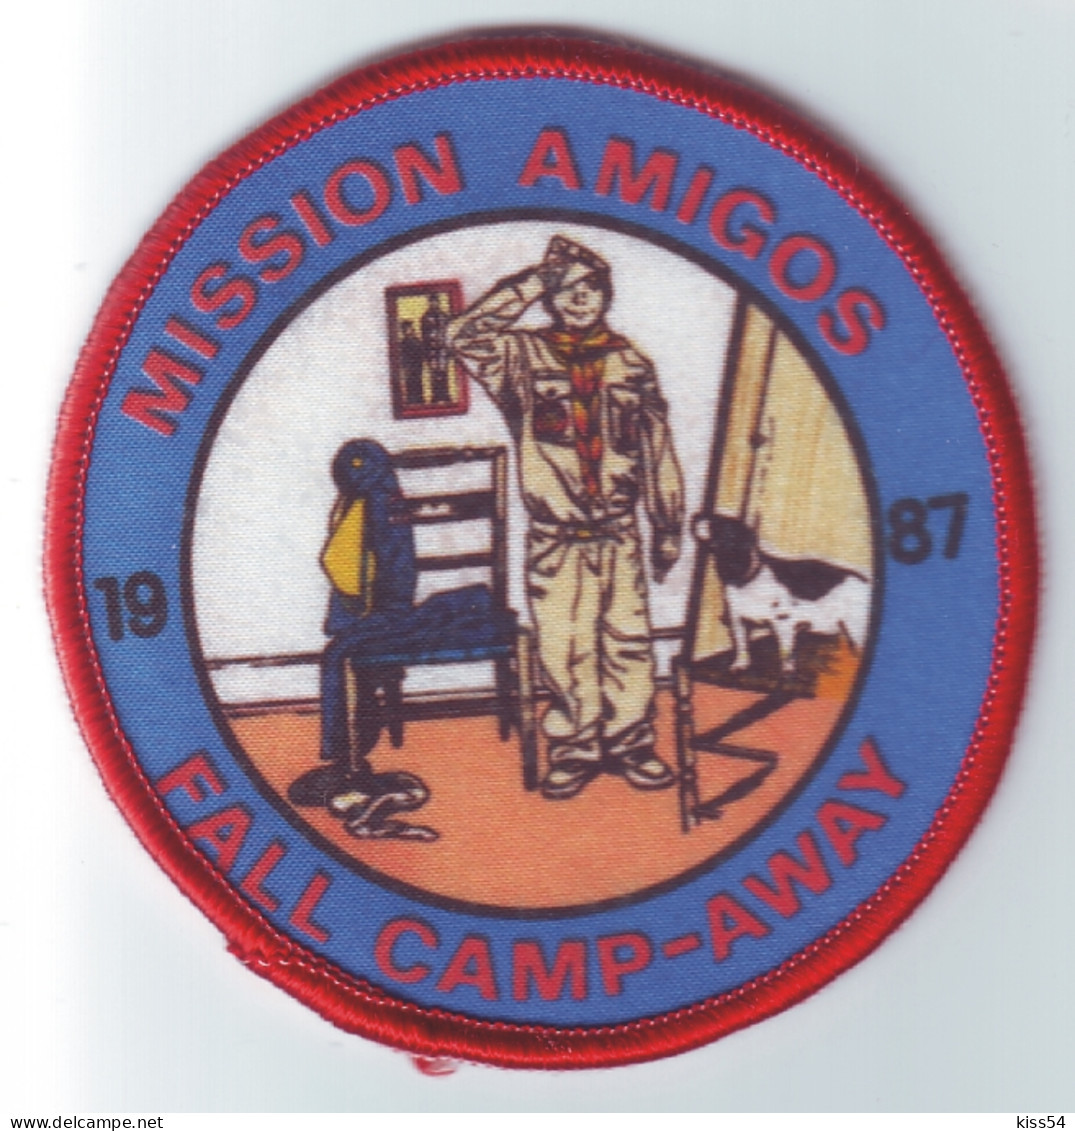 B 25 - 45 USA Scout Badge - Fall Camp-Away - 1987 - Scouting